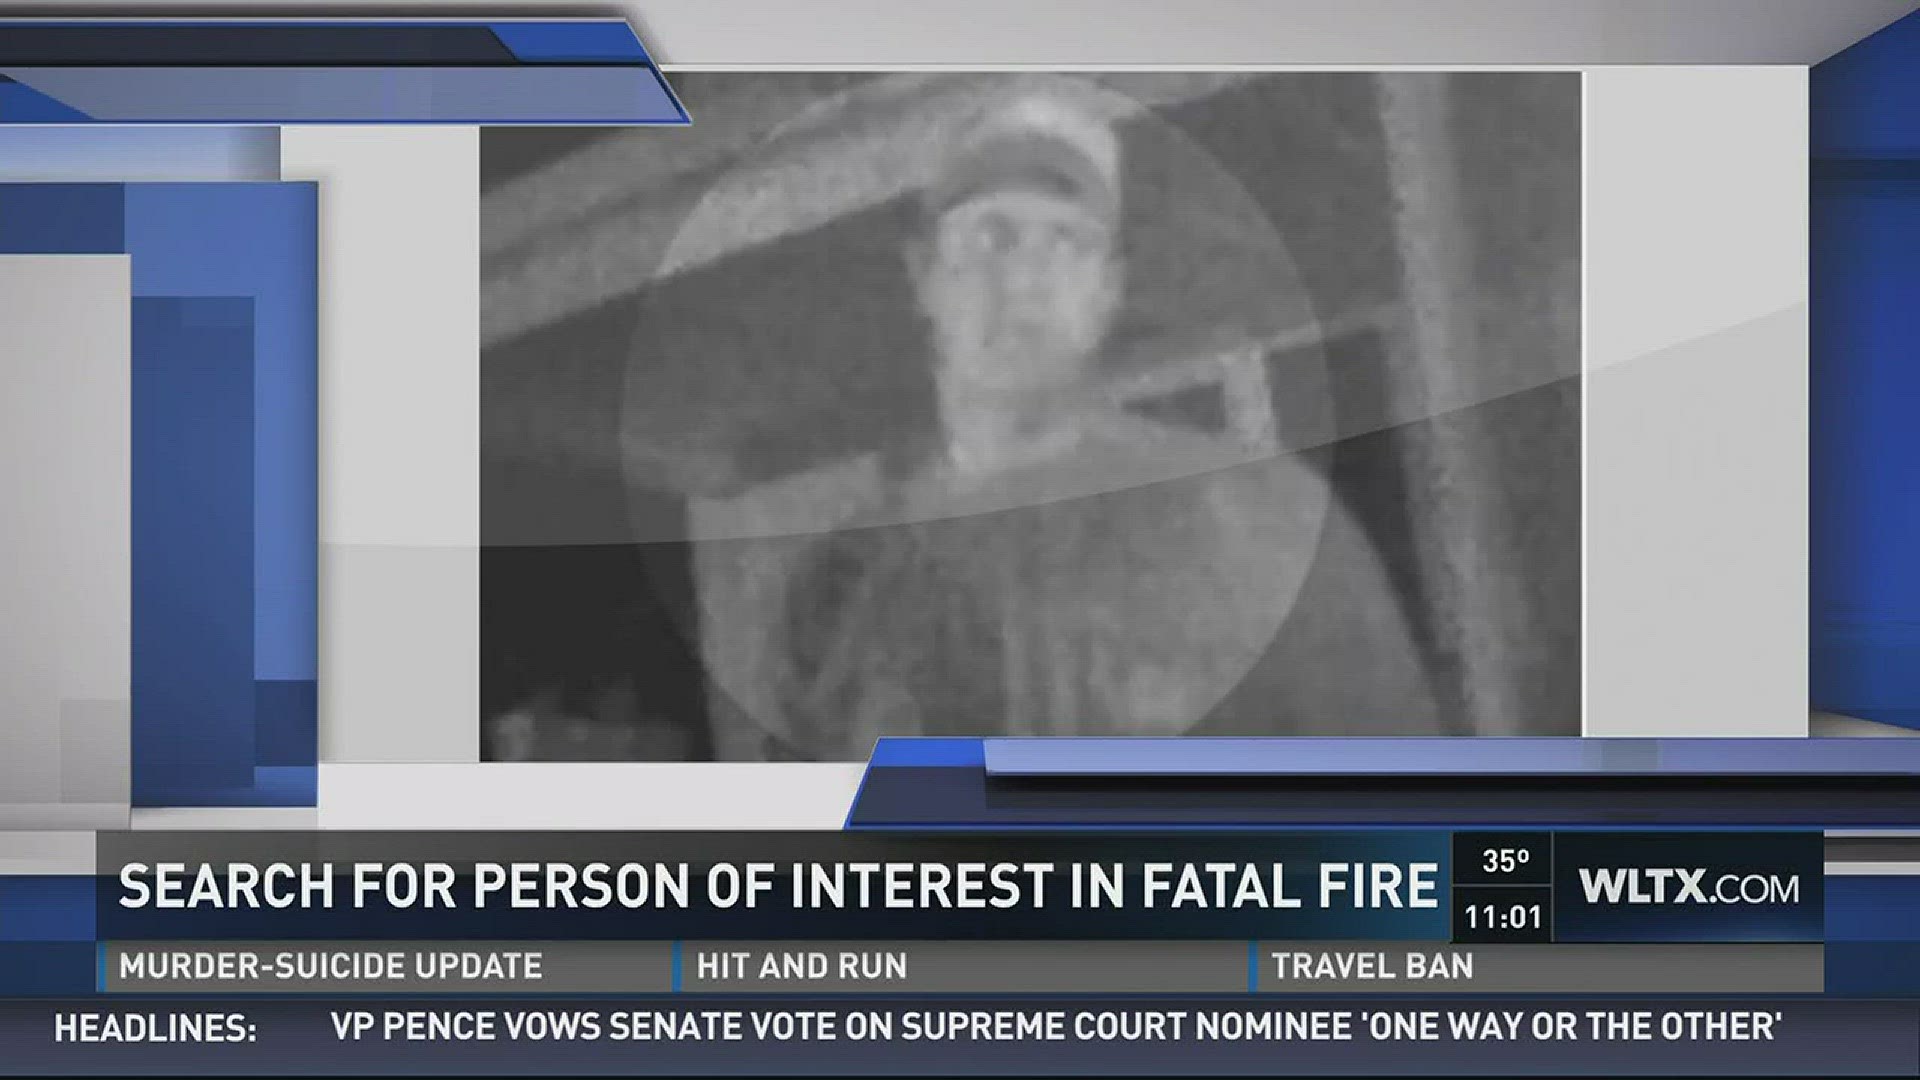 City Manager Teresa Wilson suspended the person with the Columbia Fire Department who is a person of interest in an arson case that killed a person.